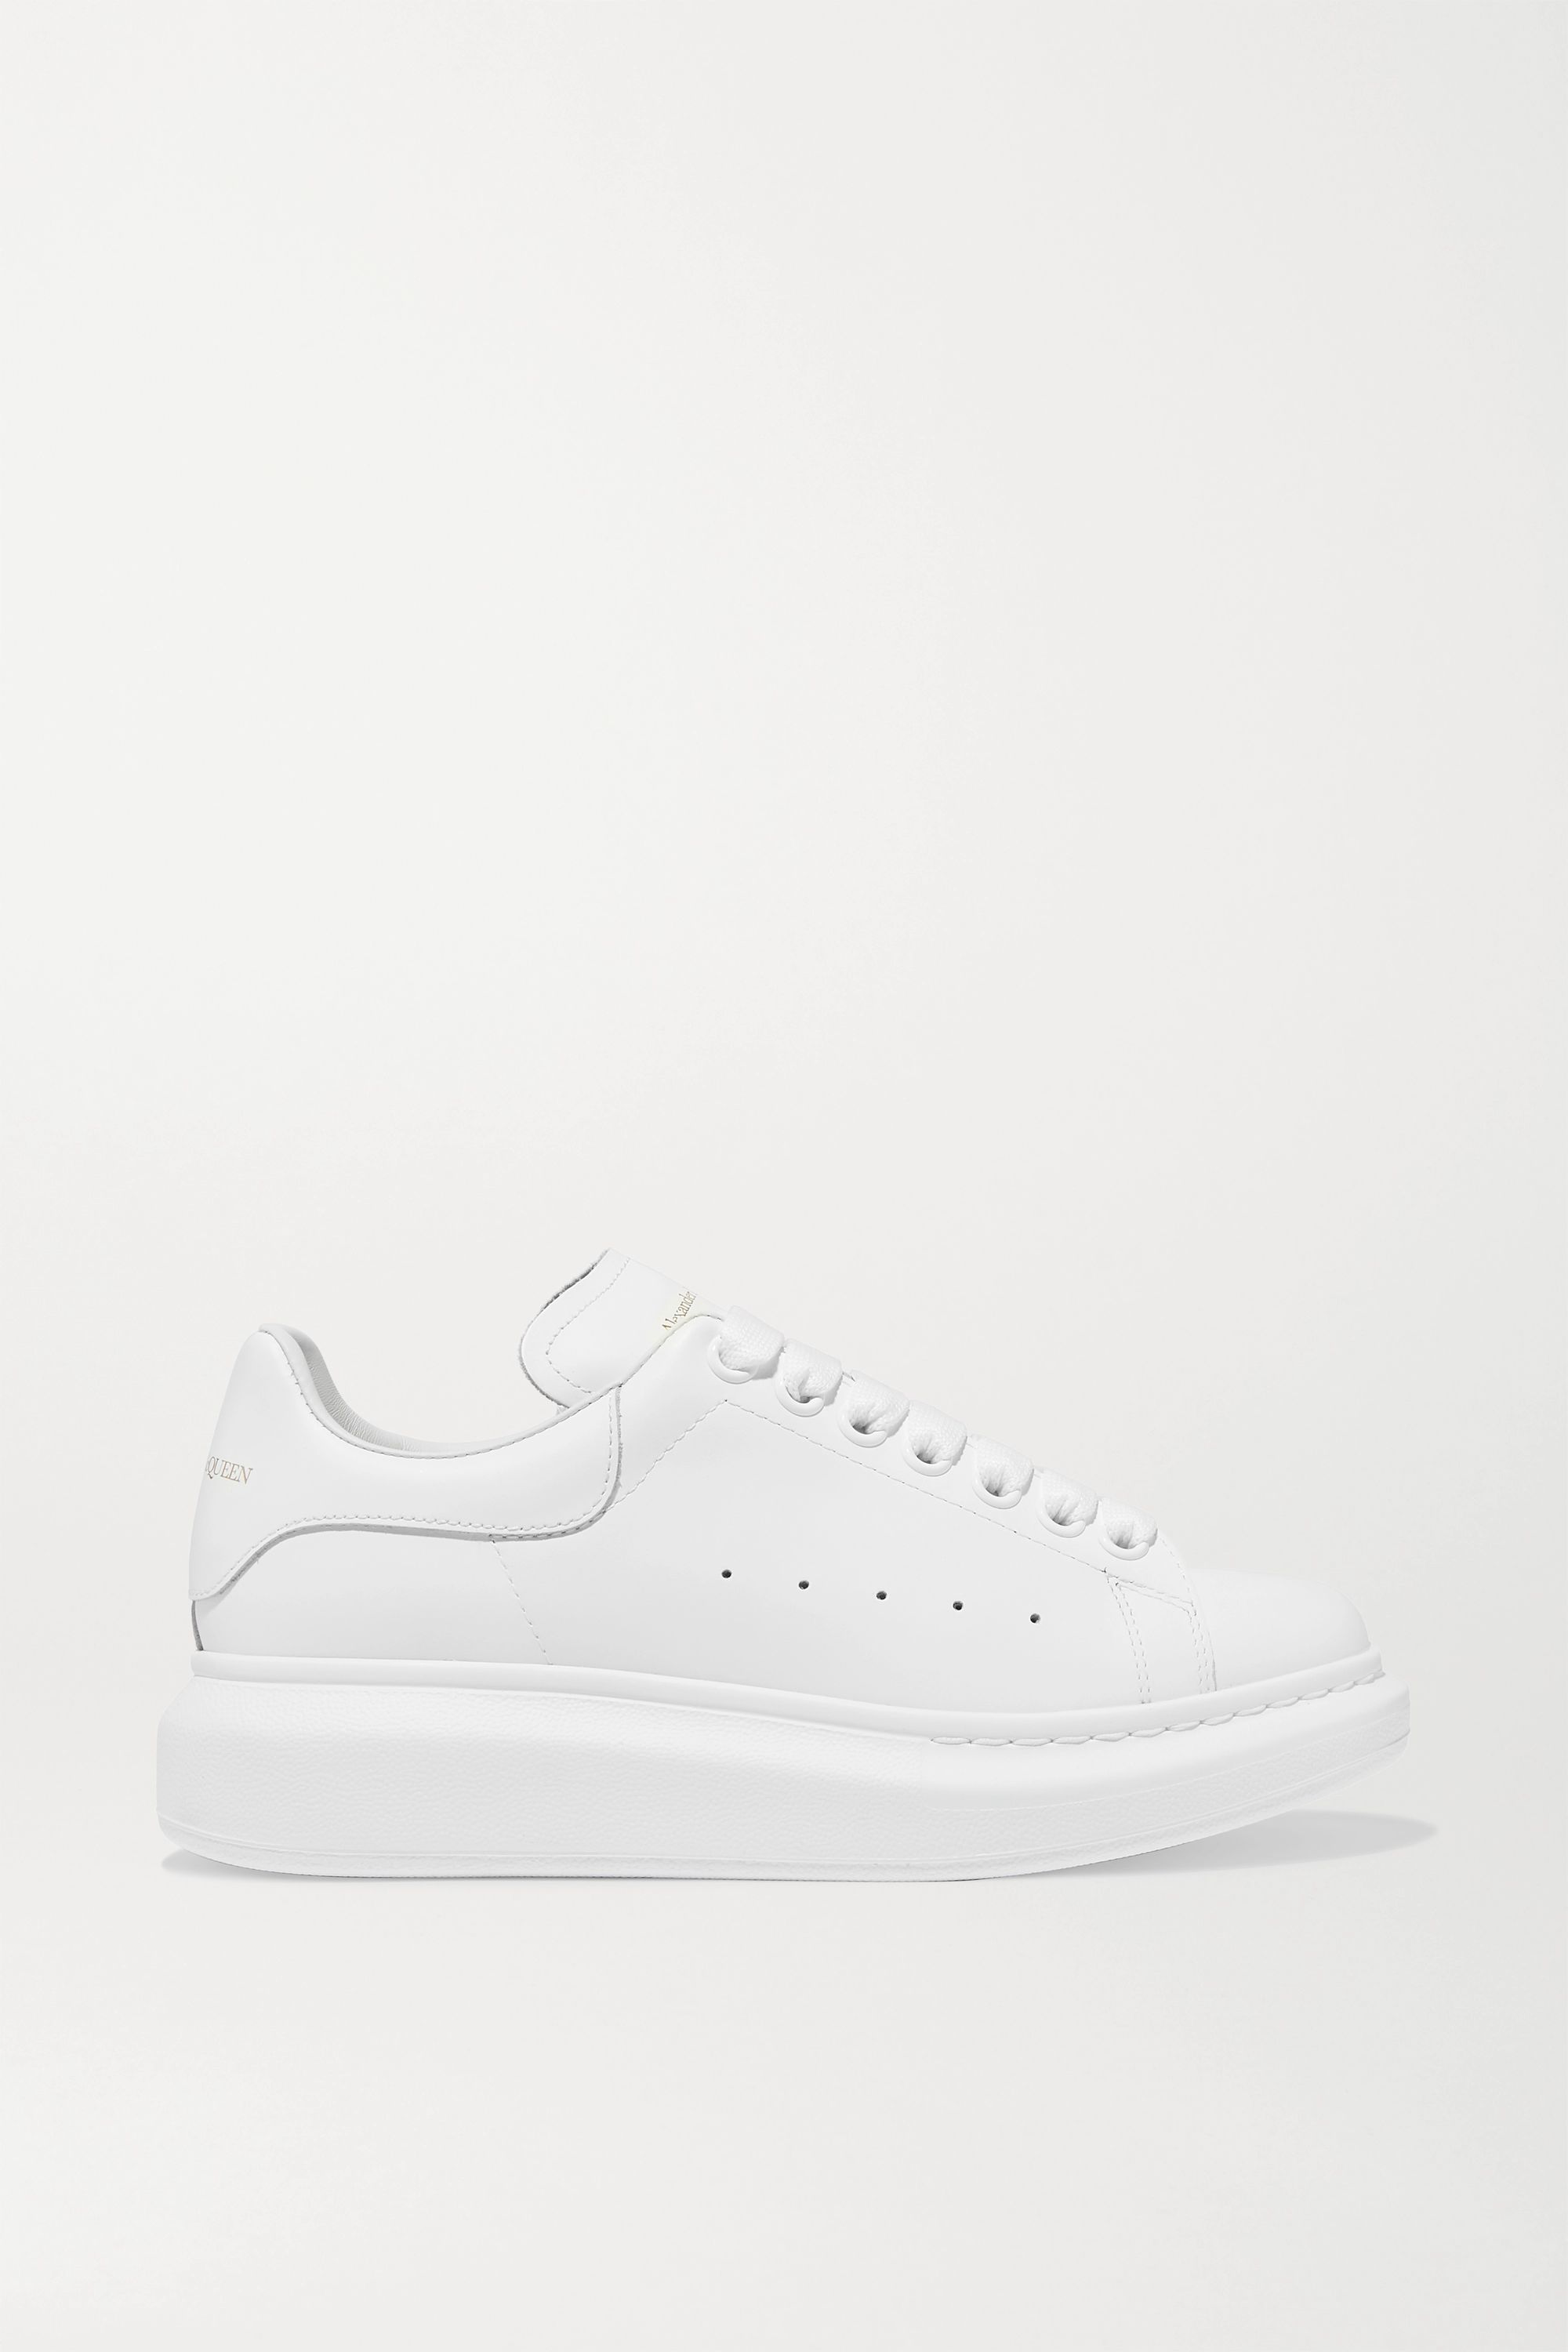 21 of the Best White Leather Sneakers for Women | Who What Wear